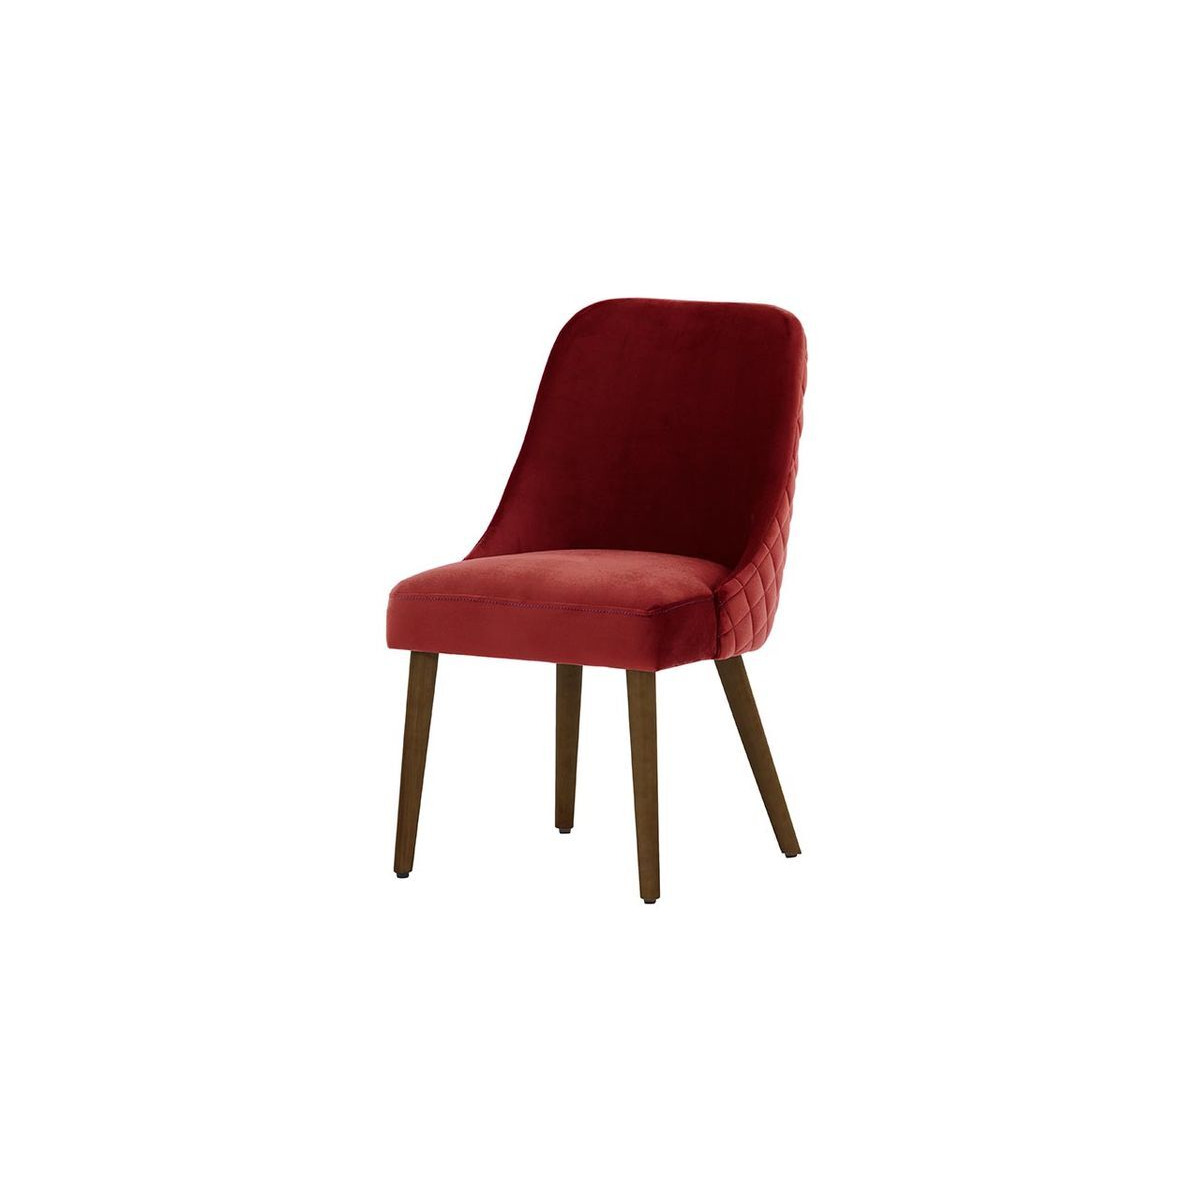 Albion Dining Chair with Stitching, dark red, Leg colour: dark oak - image 1